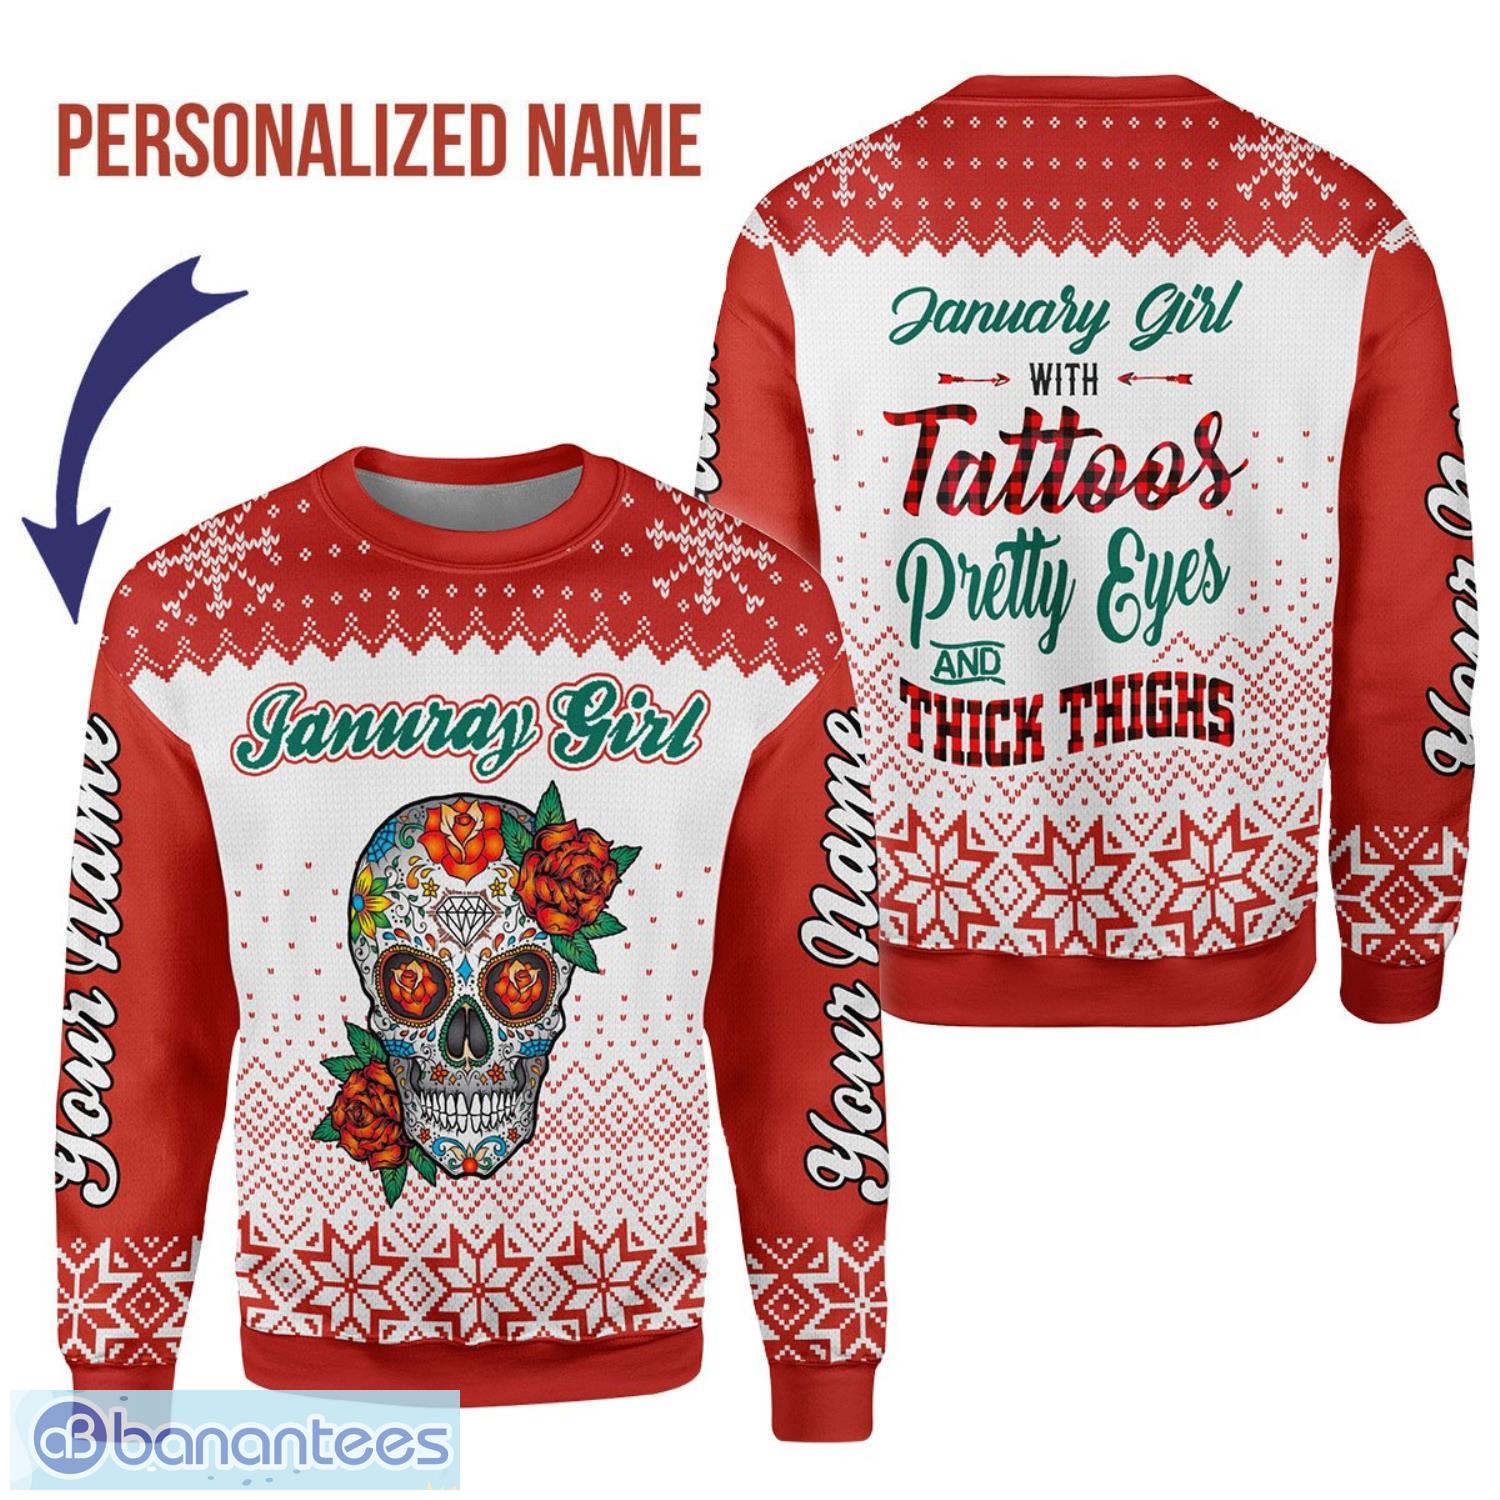 Personalized Name January Girl With Tatoos Pretty Eyes And Thick Thighs 3D 3D Ugly Christmas Sweater Christmas Gift Product Photo 1